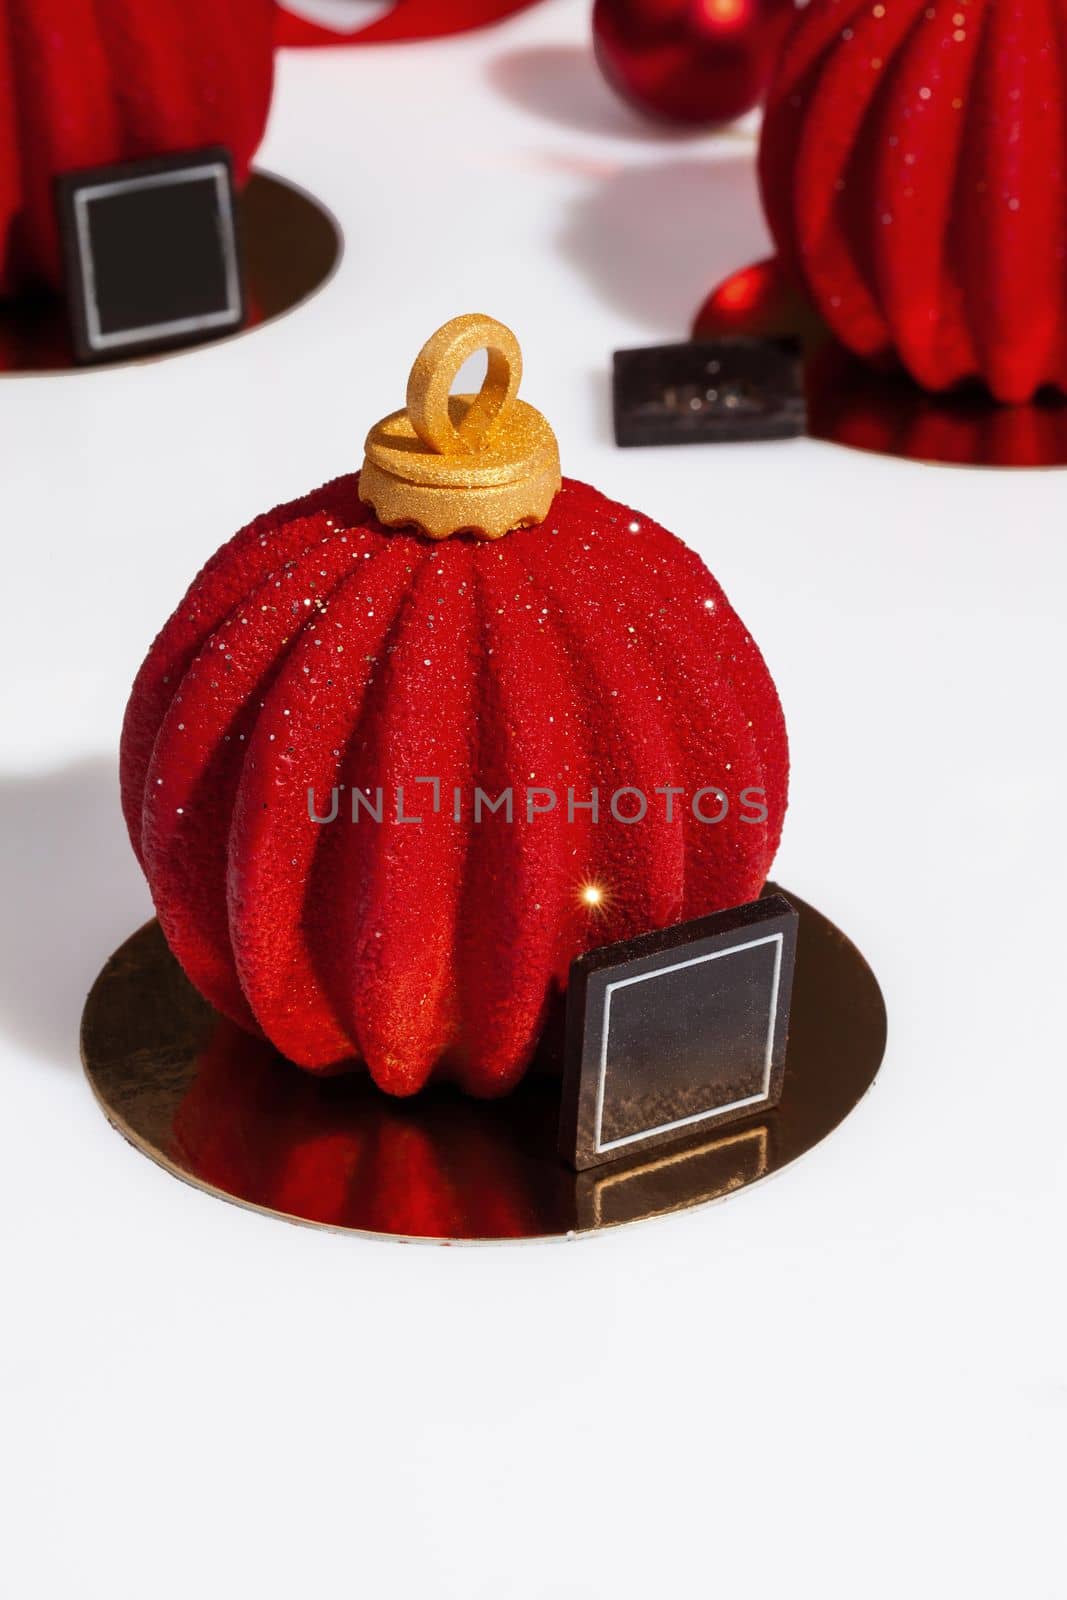 Christmas ball shaped pastries covered with scabrous sparkling red sugar icing with chocolate on golden serving cardboard on white background. Creating festive mood and atmosphere with sweets